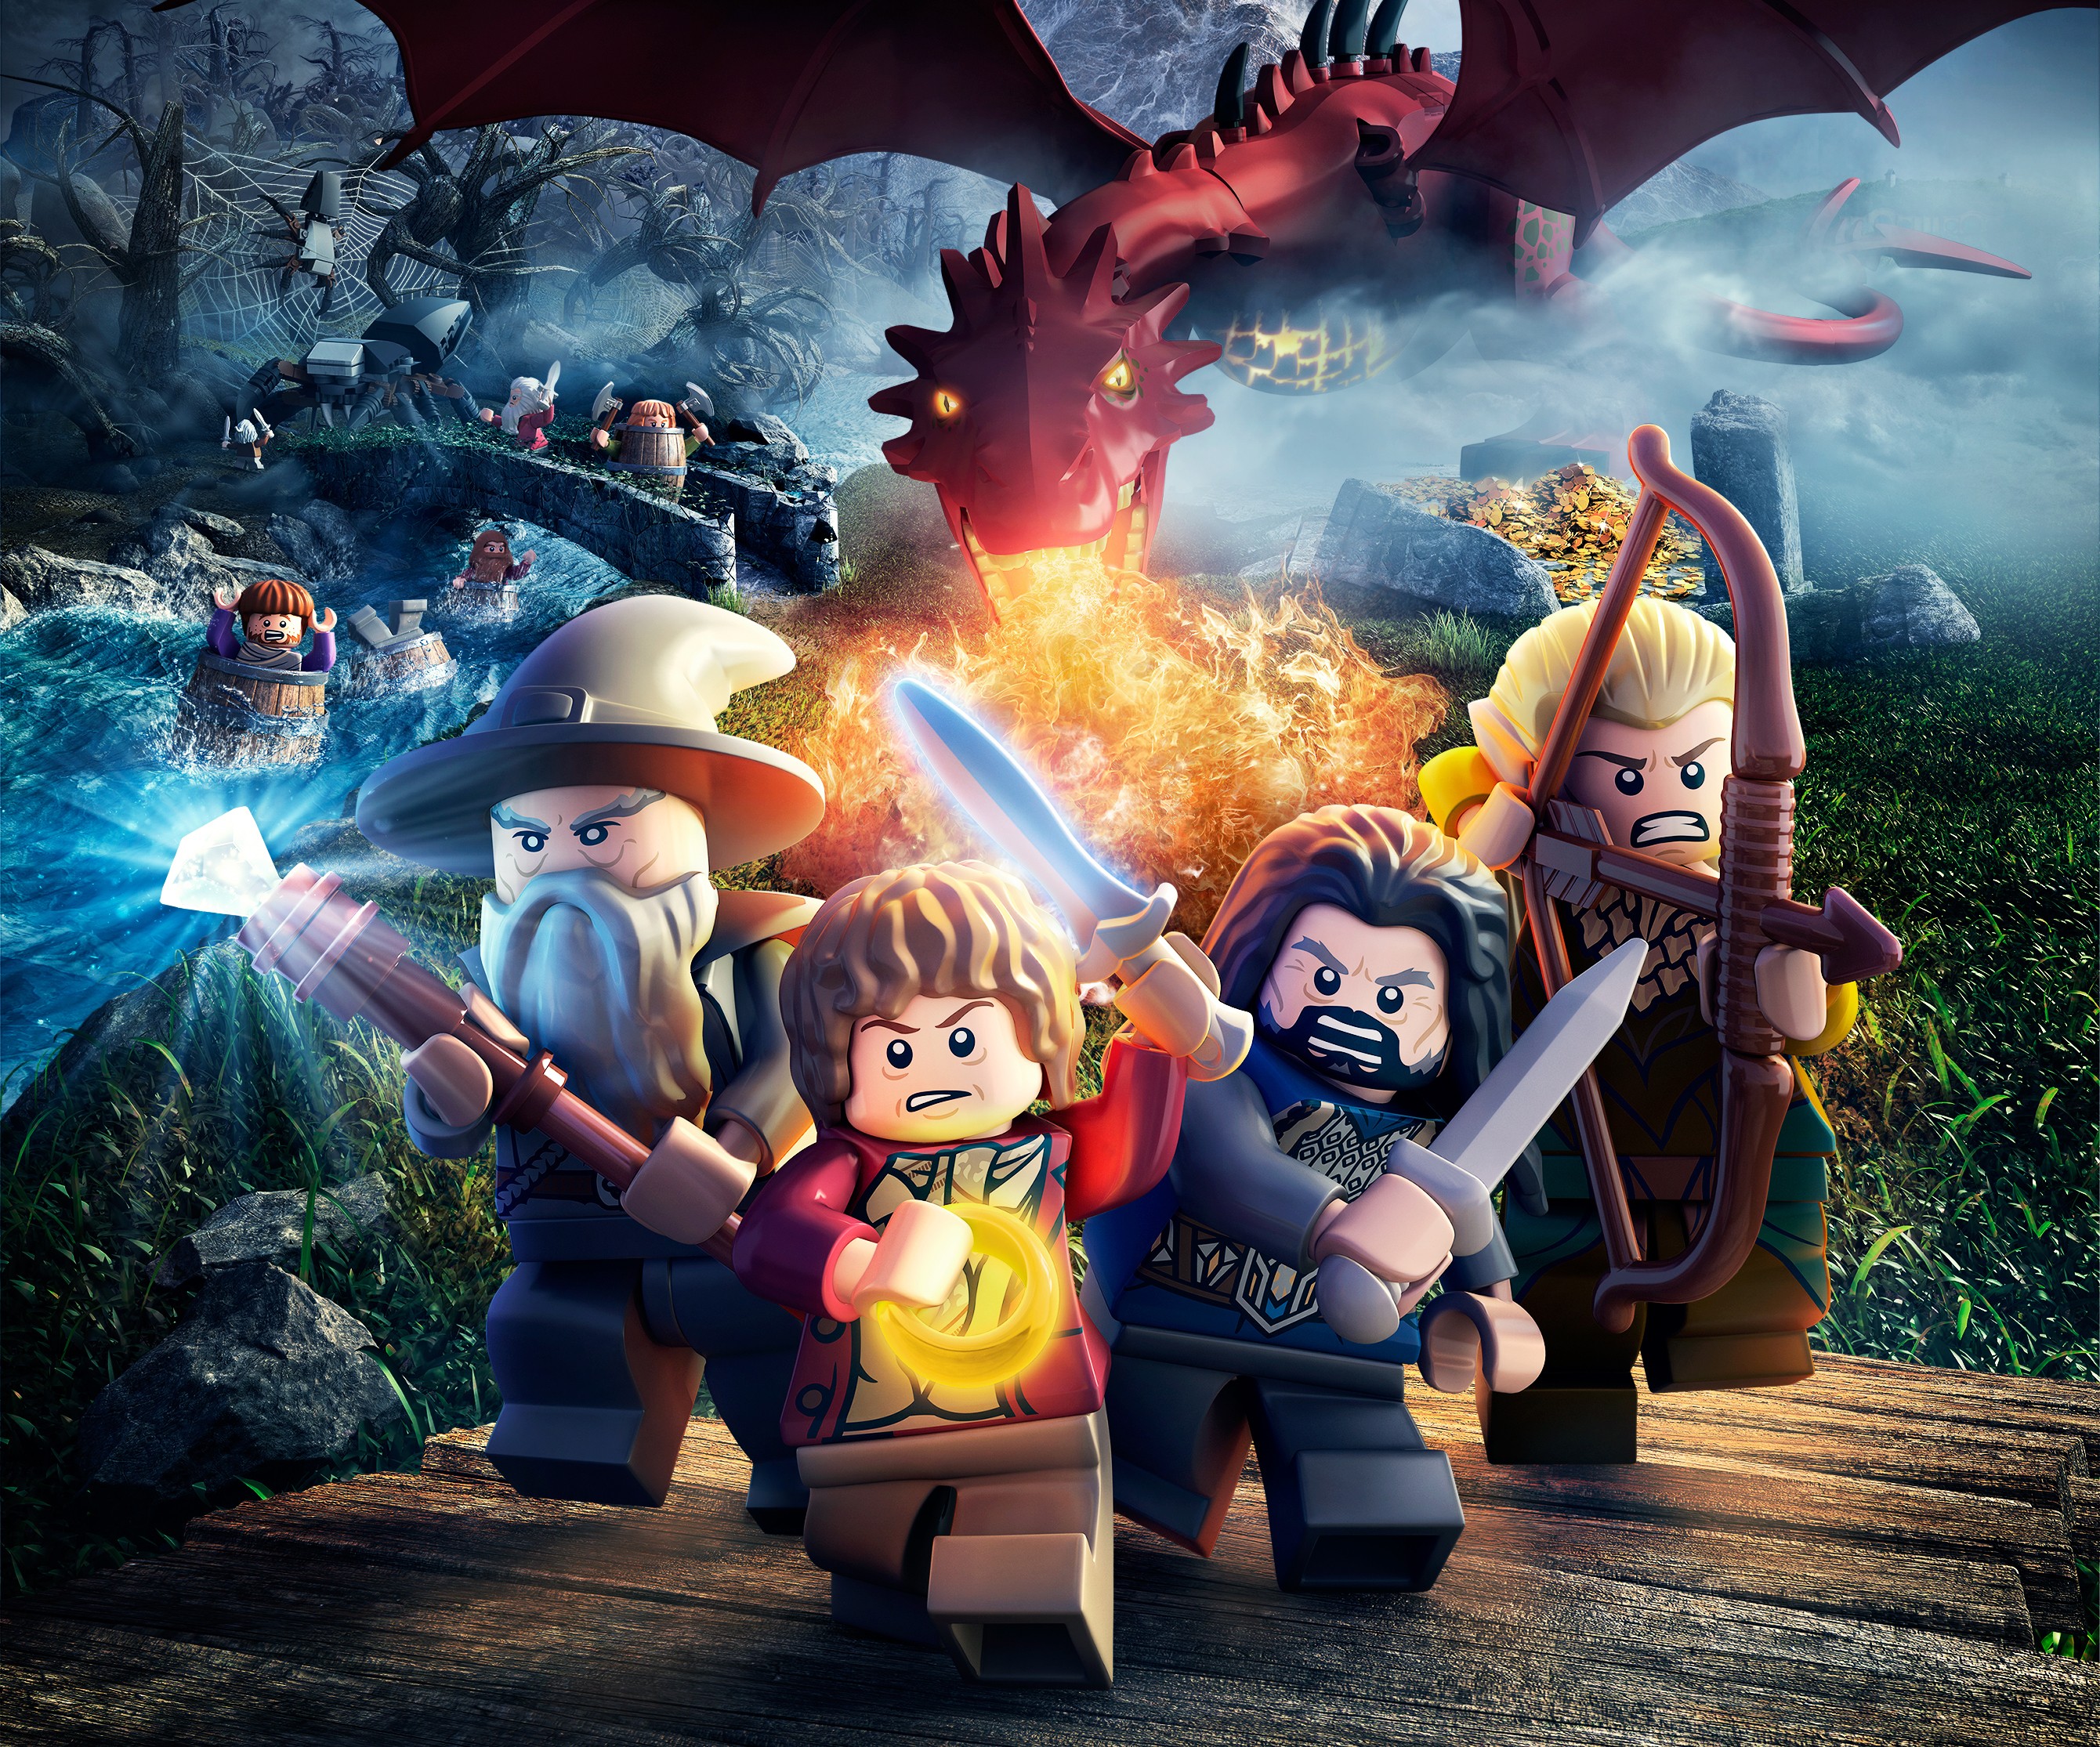 General 2680x2230 LEGO The Hobbit video games LEGO The Hobbit toys Gandalf Bilbo Baggins Legolas Smaug Thorin Oakenshield video game characters Book characters